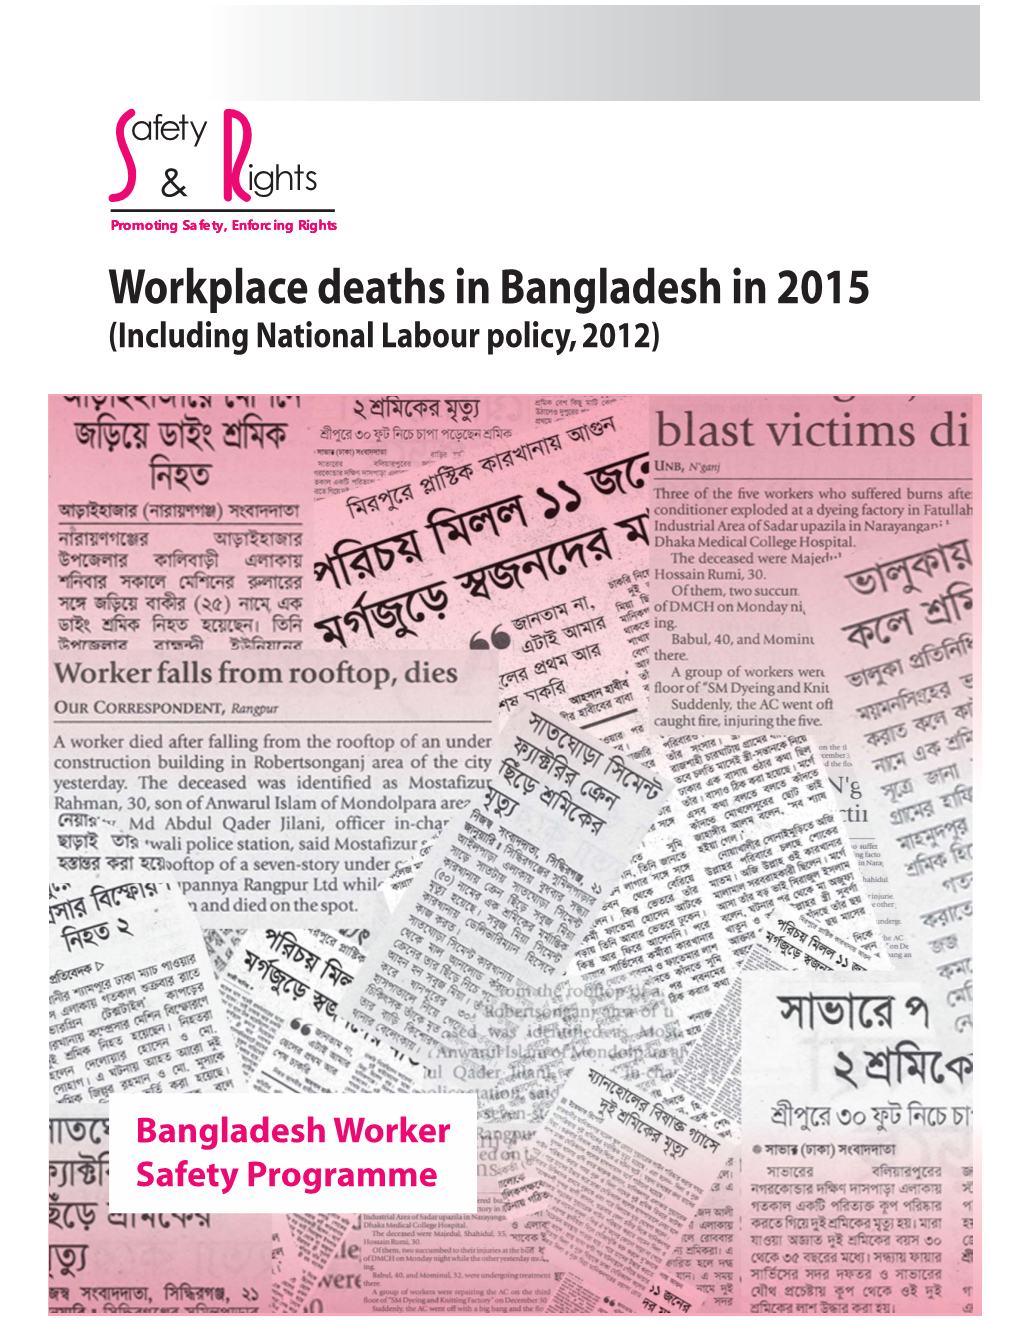 Workplace Deaths in Bangladesh in 2015 (Including National Labour Policy, 2012) Workplace Deaths in Bangladesh in 2015 (Including National Labour Policy, 2012)